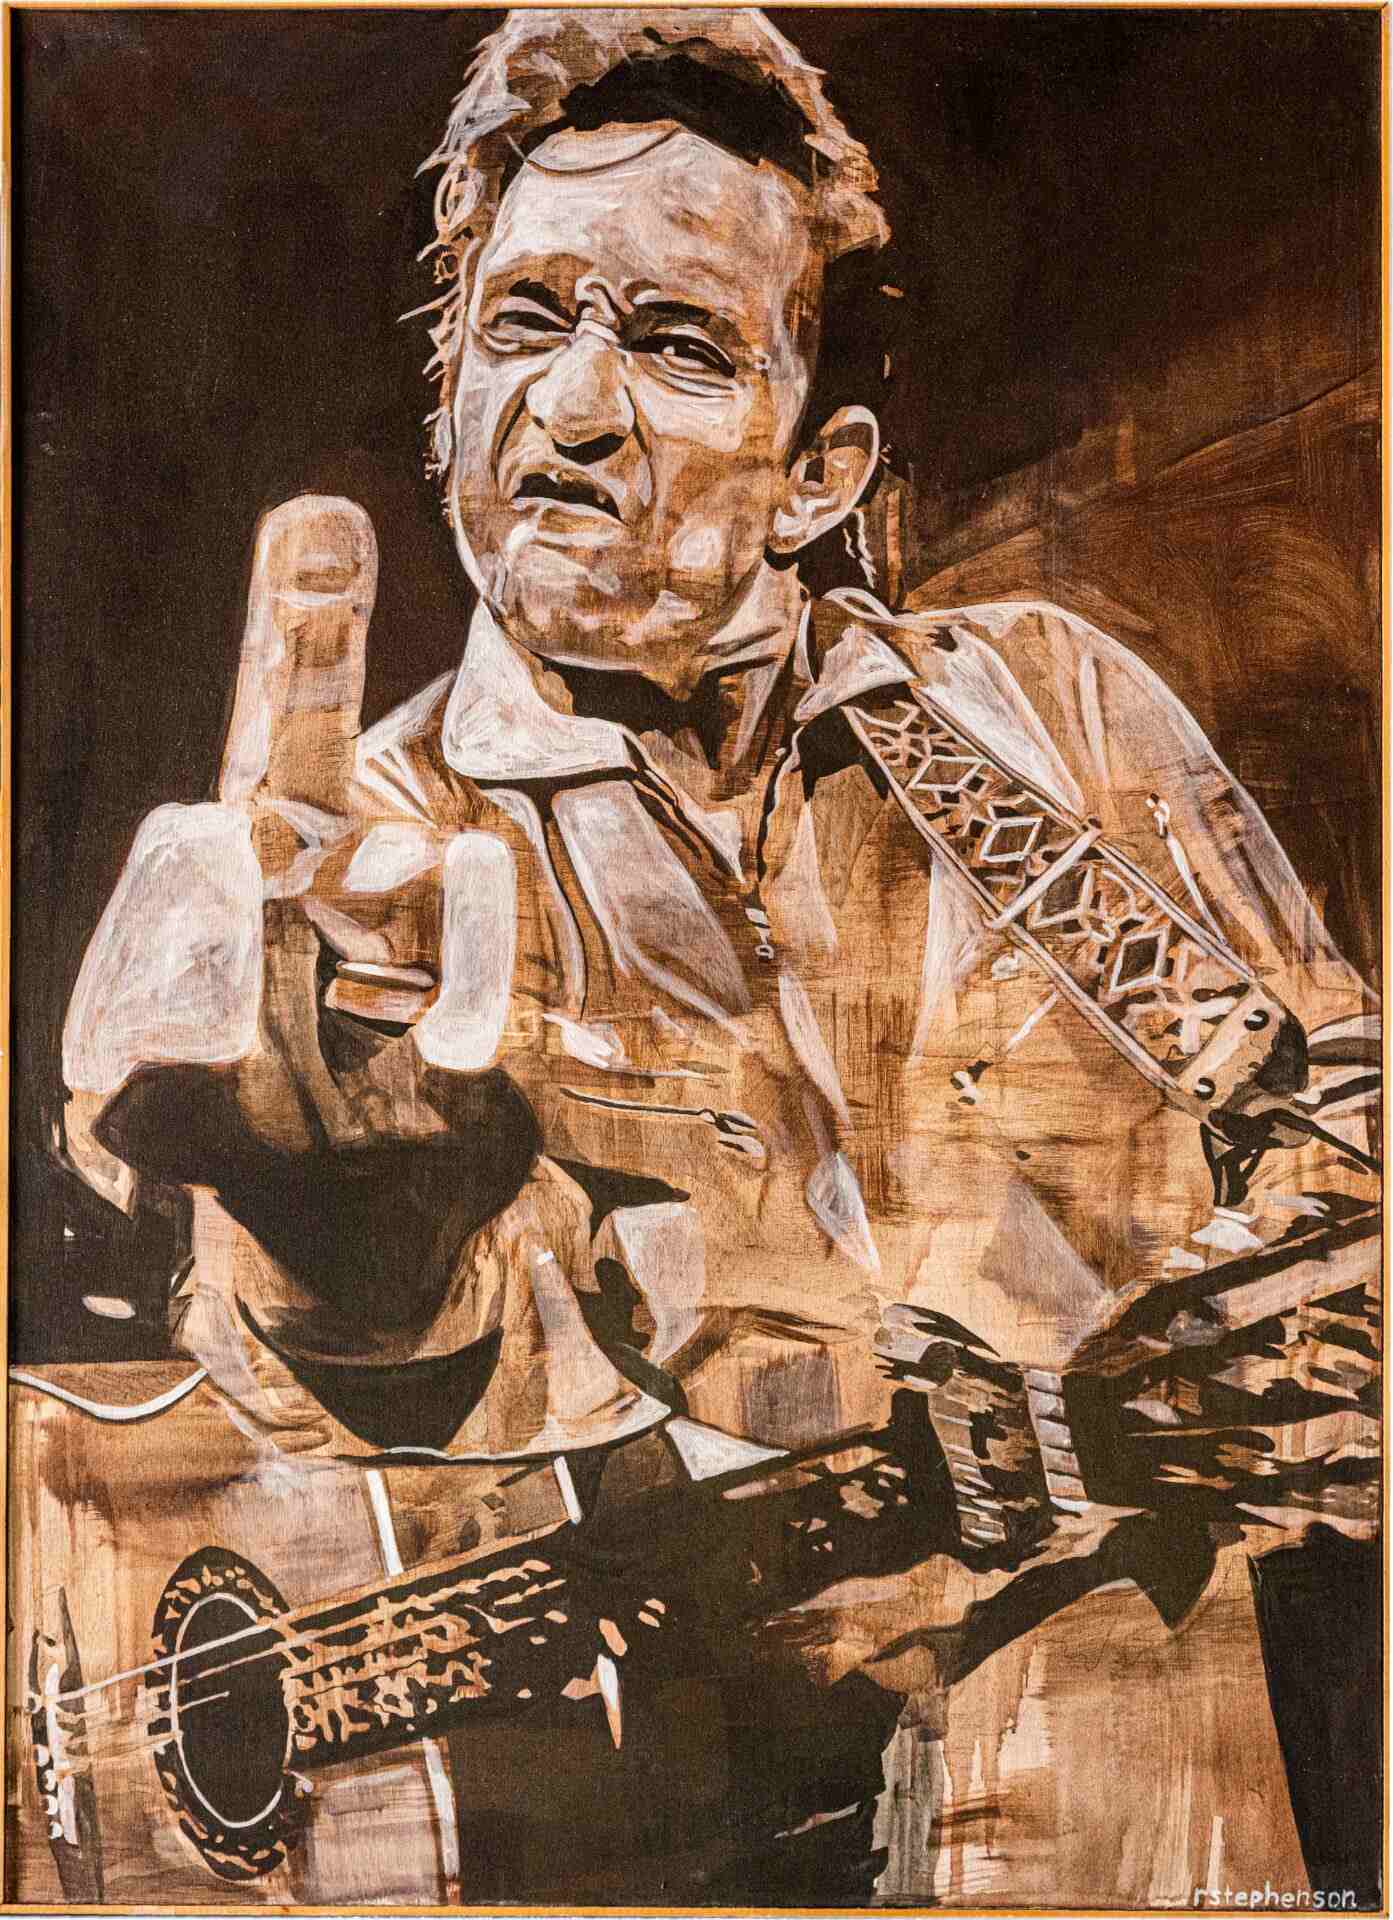 Johnny Cash With Pointing Finger Artwork